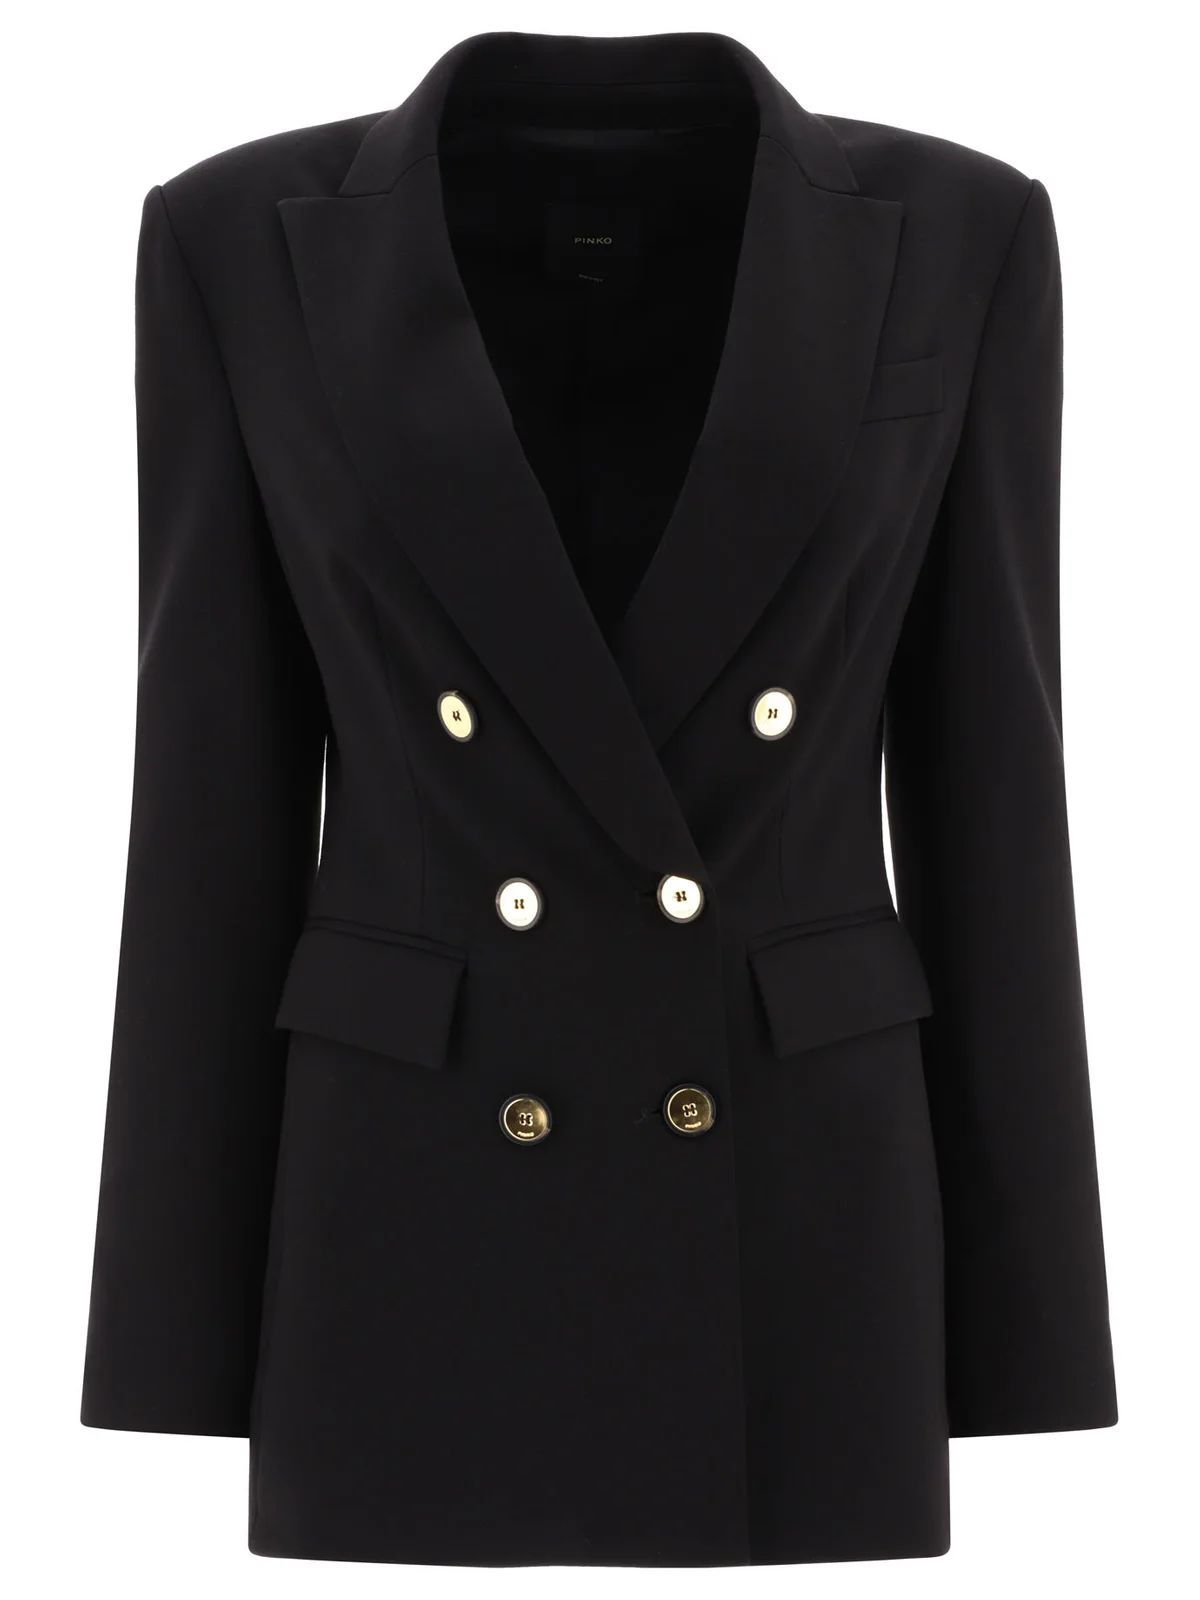 Pinko Double Breasted Tailored Blazer | Cettire Global